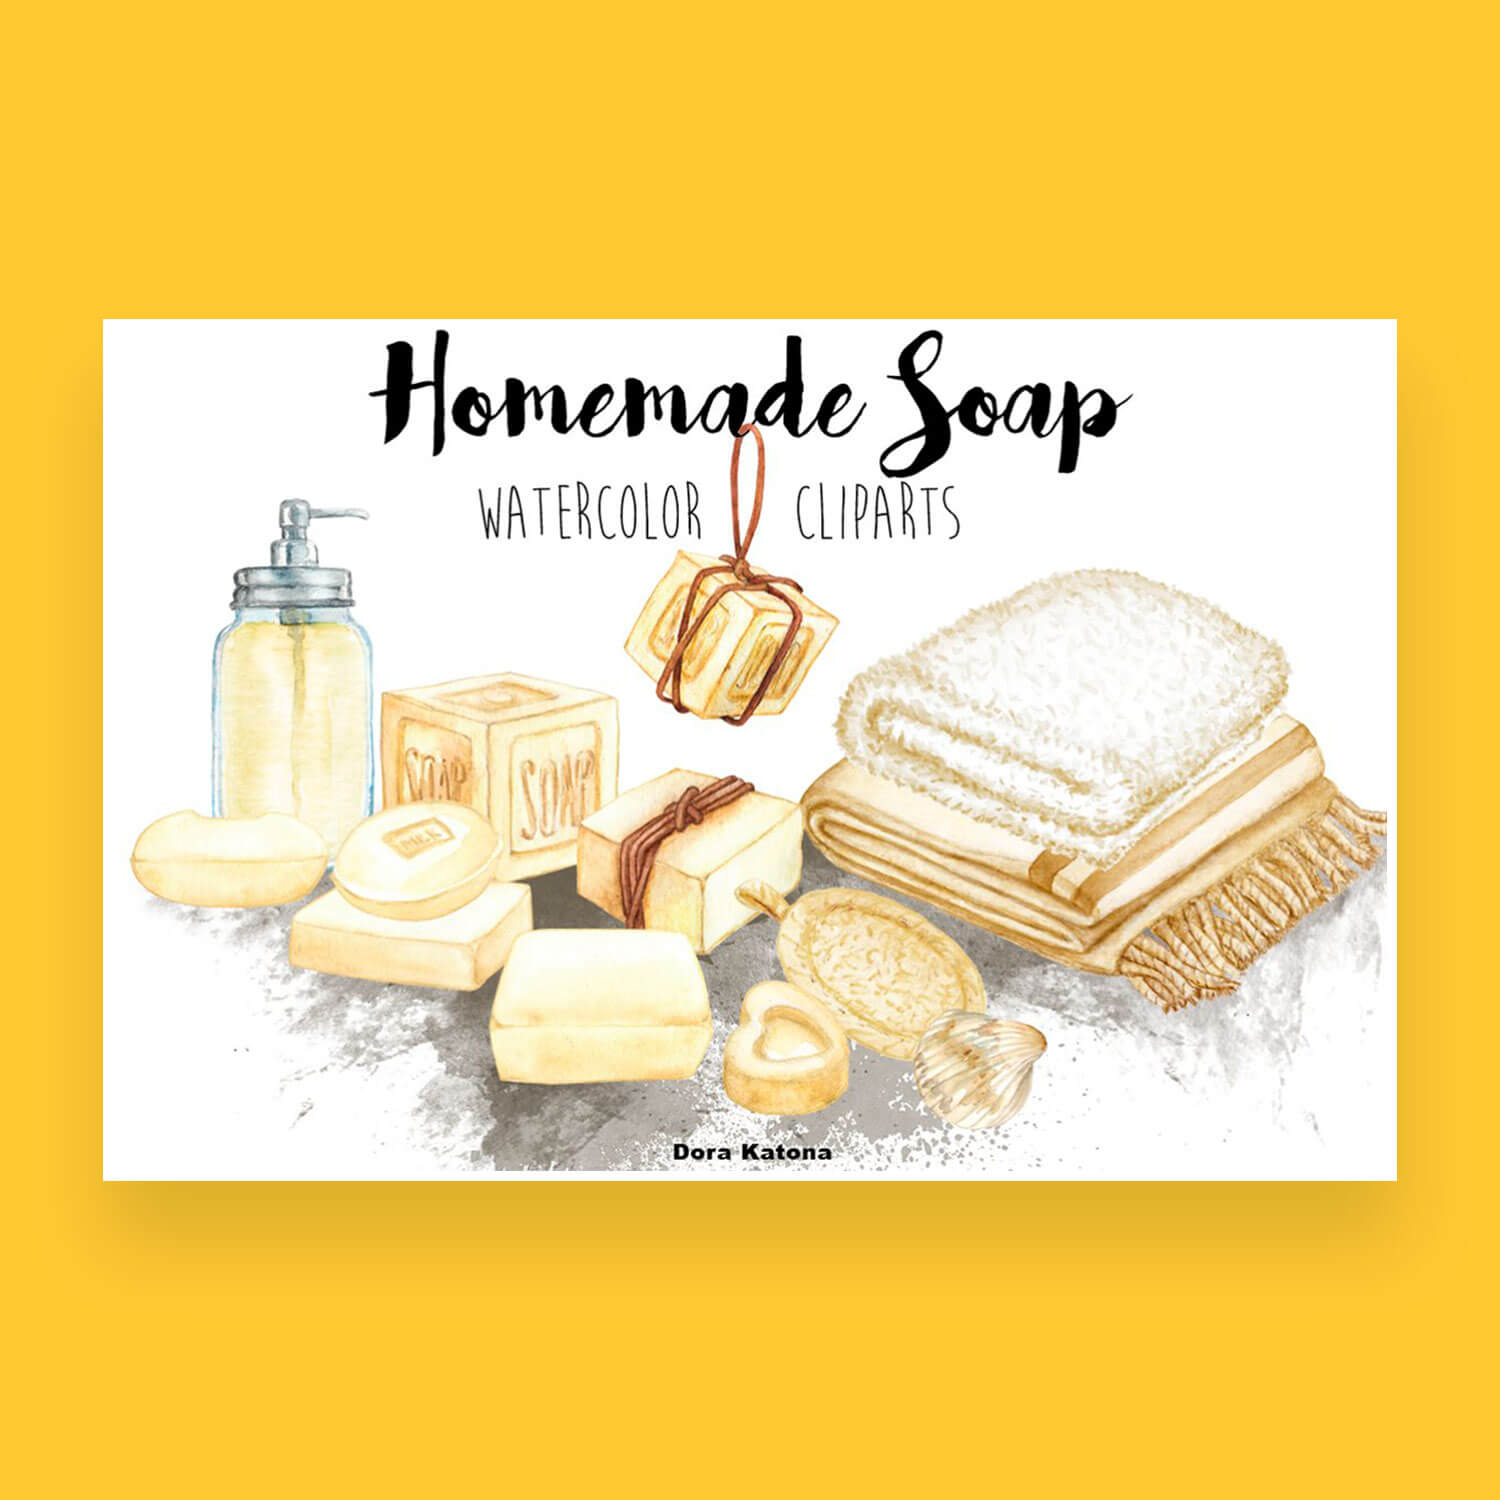 Image Clipart Homemade soap on yellow background.